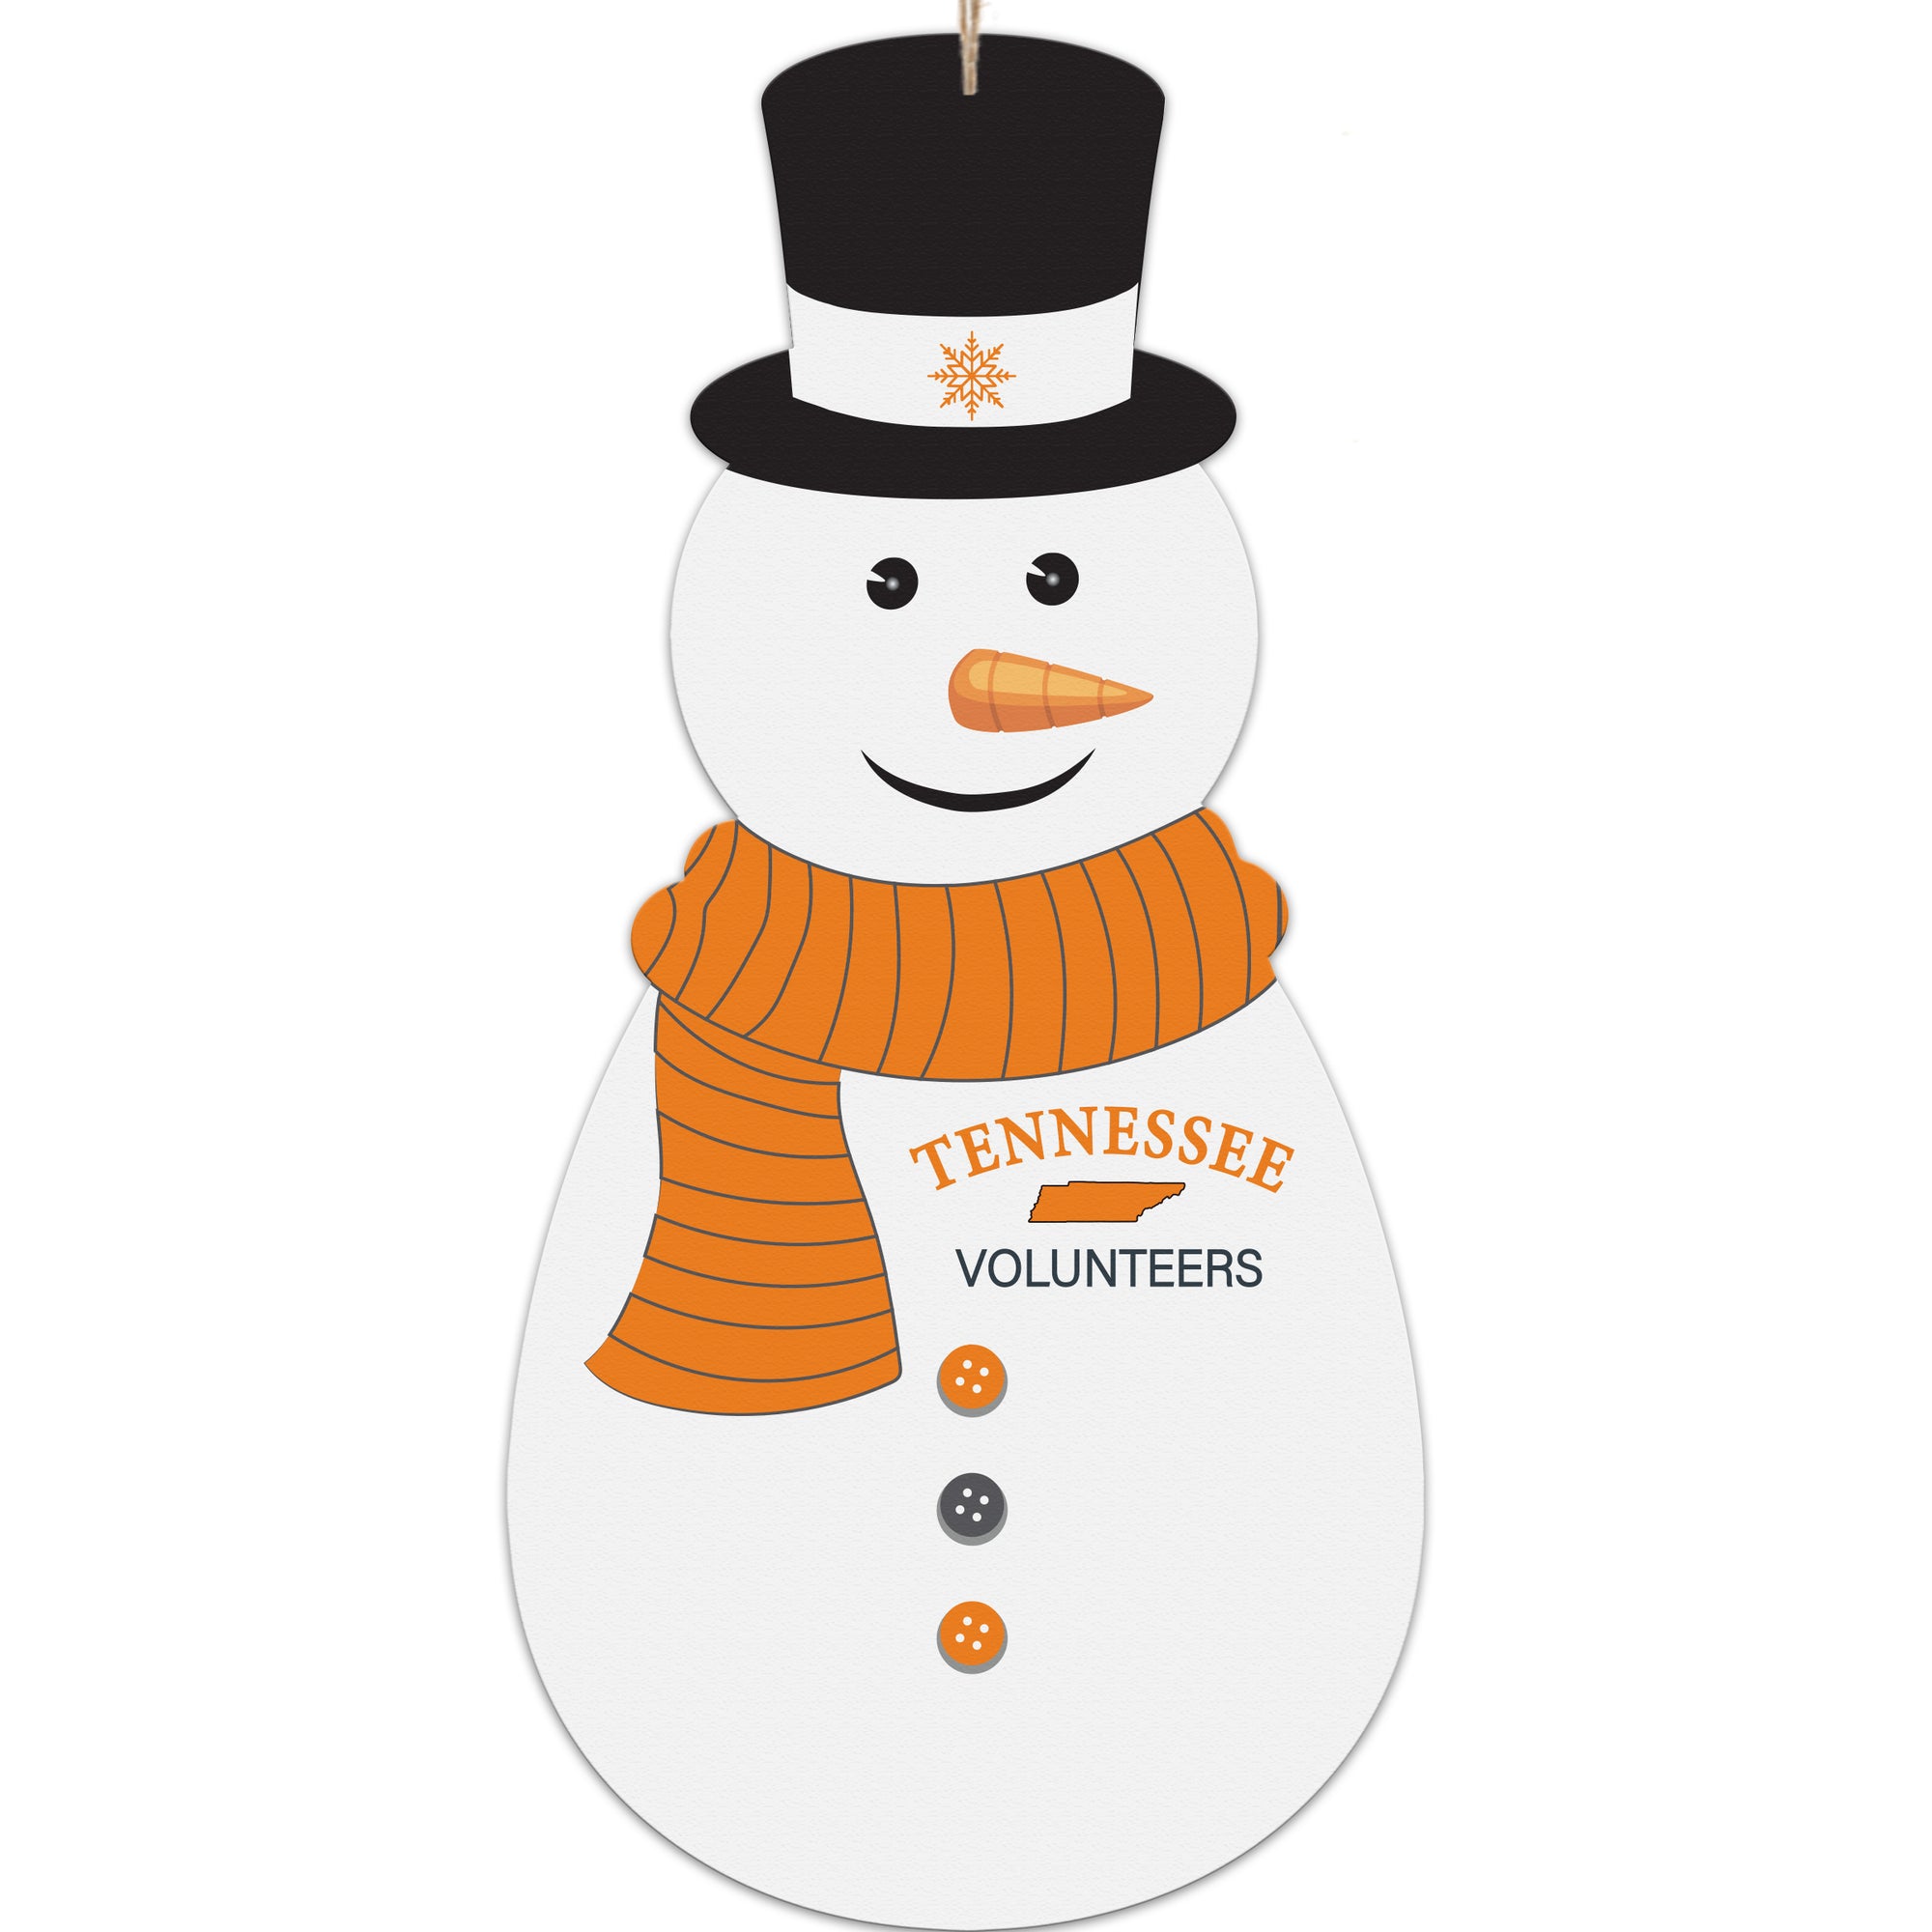 Lifesong Milestones Personalized Christmas Tree Decoration Tennessee Volunteers Snowman Ornament - Holiday Decor For Home Gift Ideas 8x16